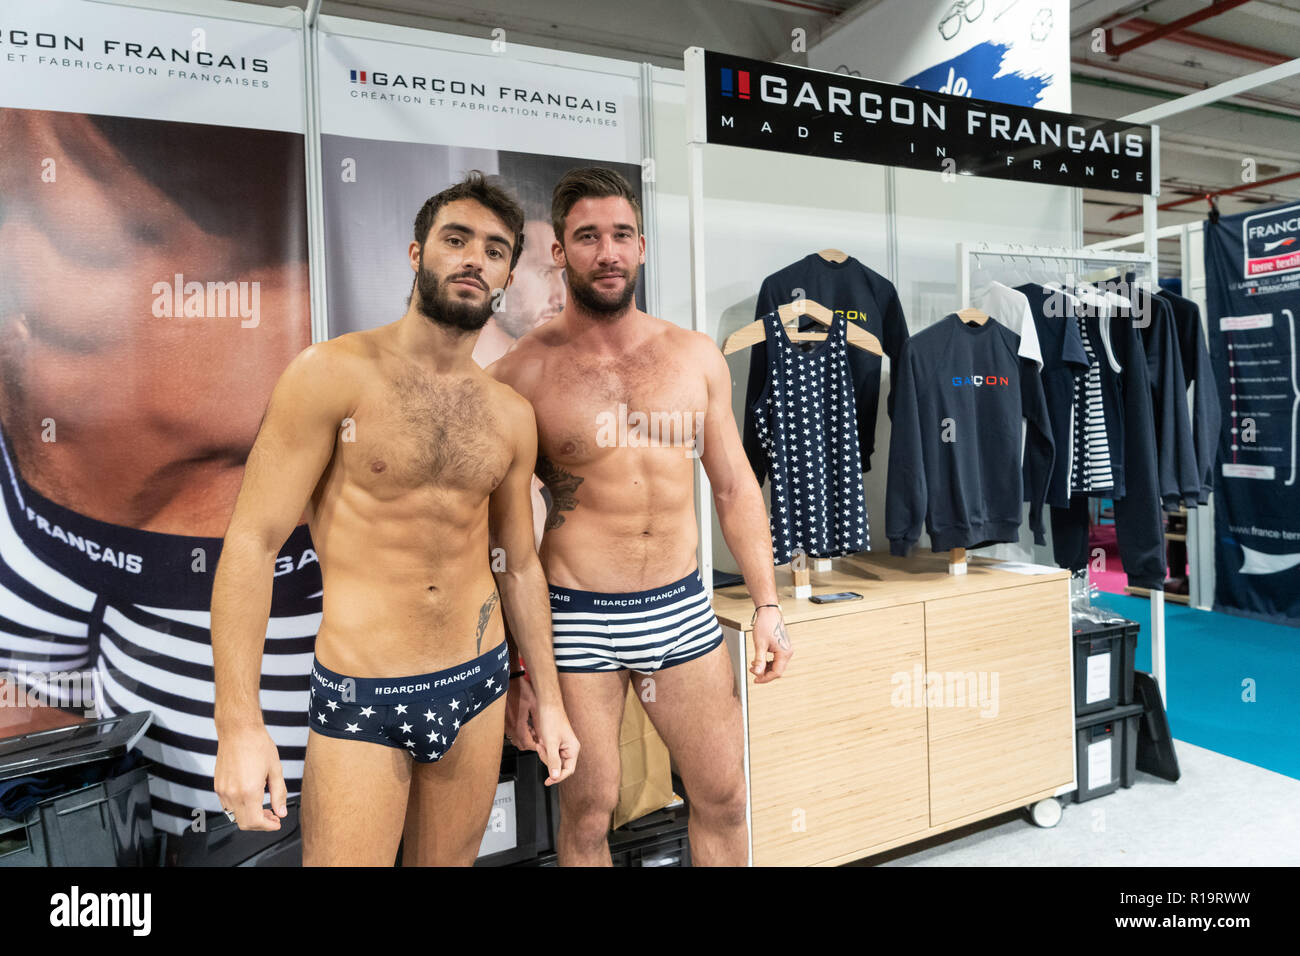 Paris, France. 10 November 2018. Two underwear models for Graçon Français,  an underwear brand, during the opening day of MIF Expo, a trade show for  products made in France. The exhibition is